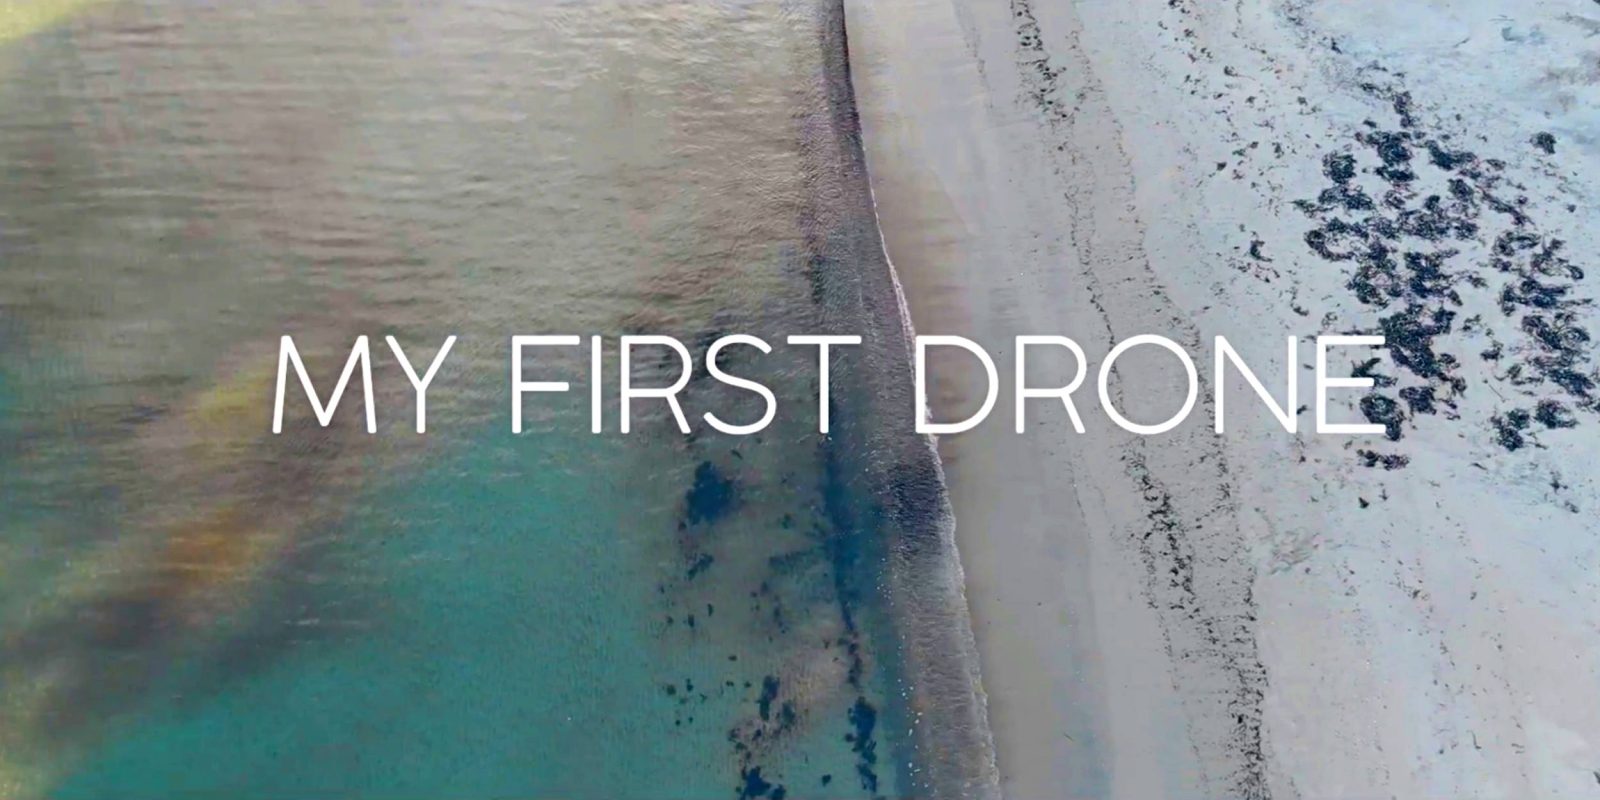 DroneRise - 'My first drone' video shot with a DJI Mavic Air